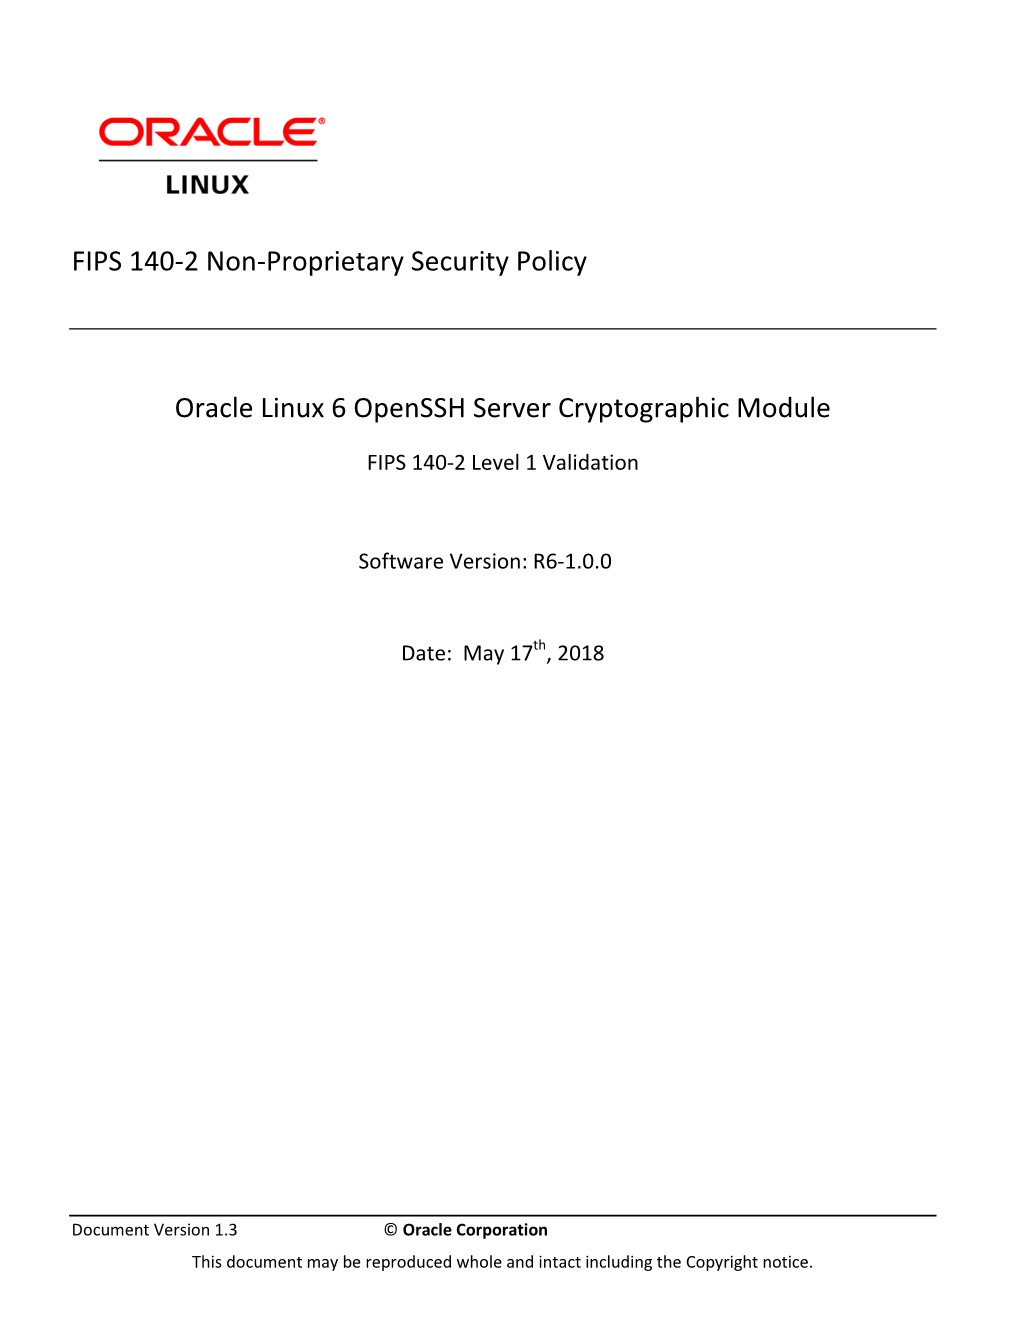 FIPS 140-2 Non-Proprietary Security Policy Oracle Linux 6 Openssh